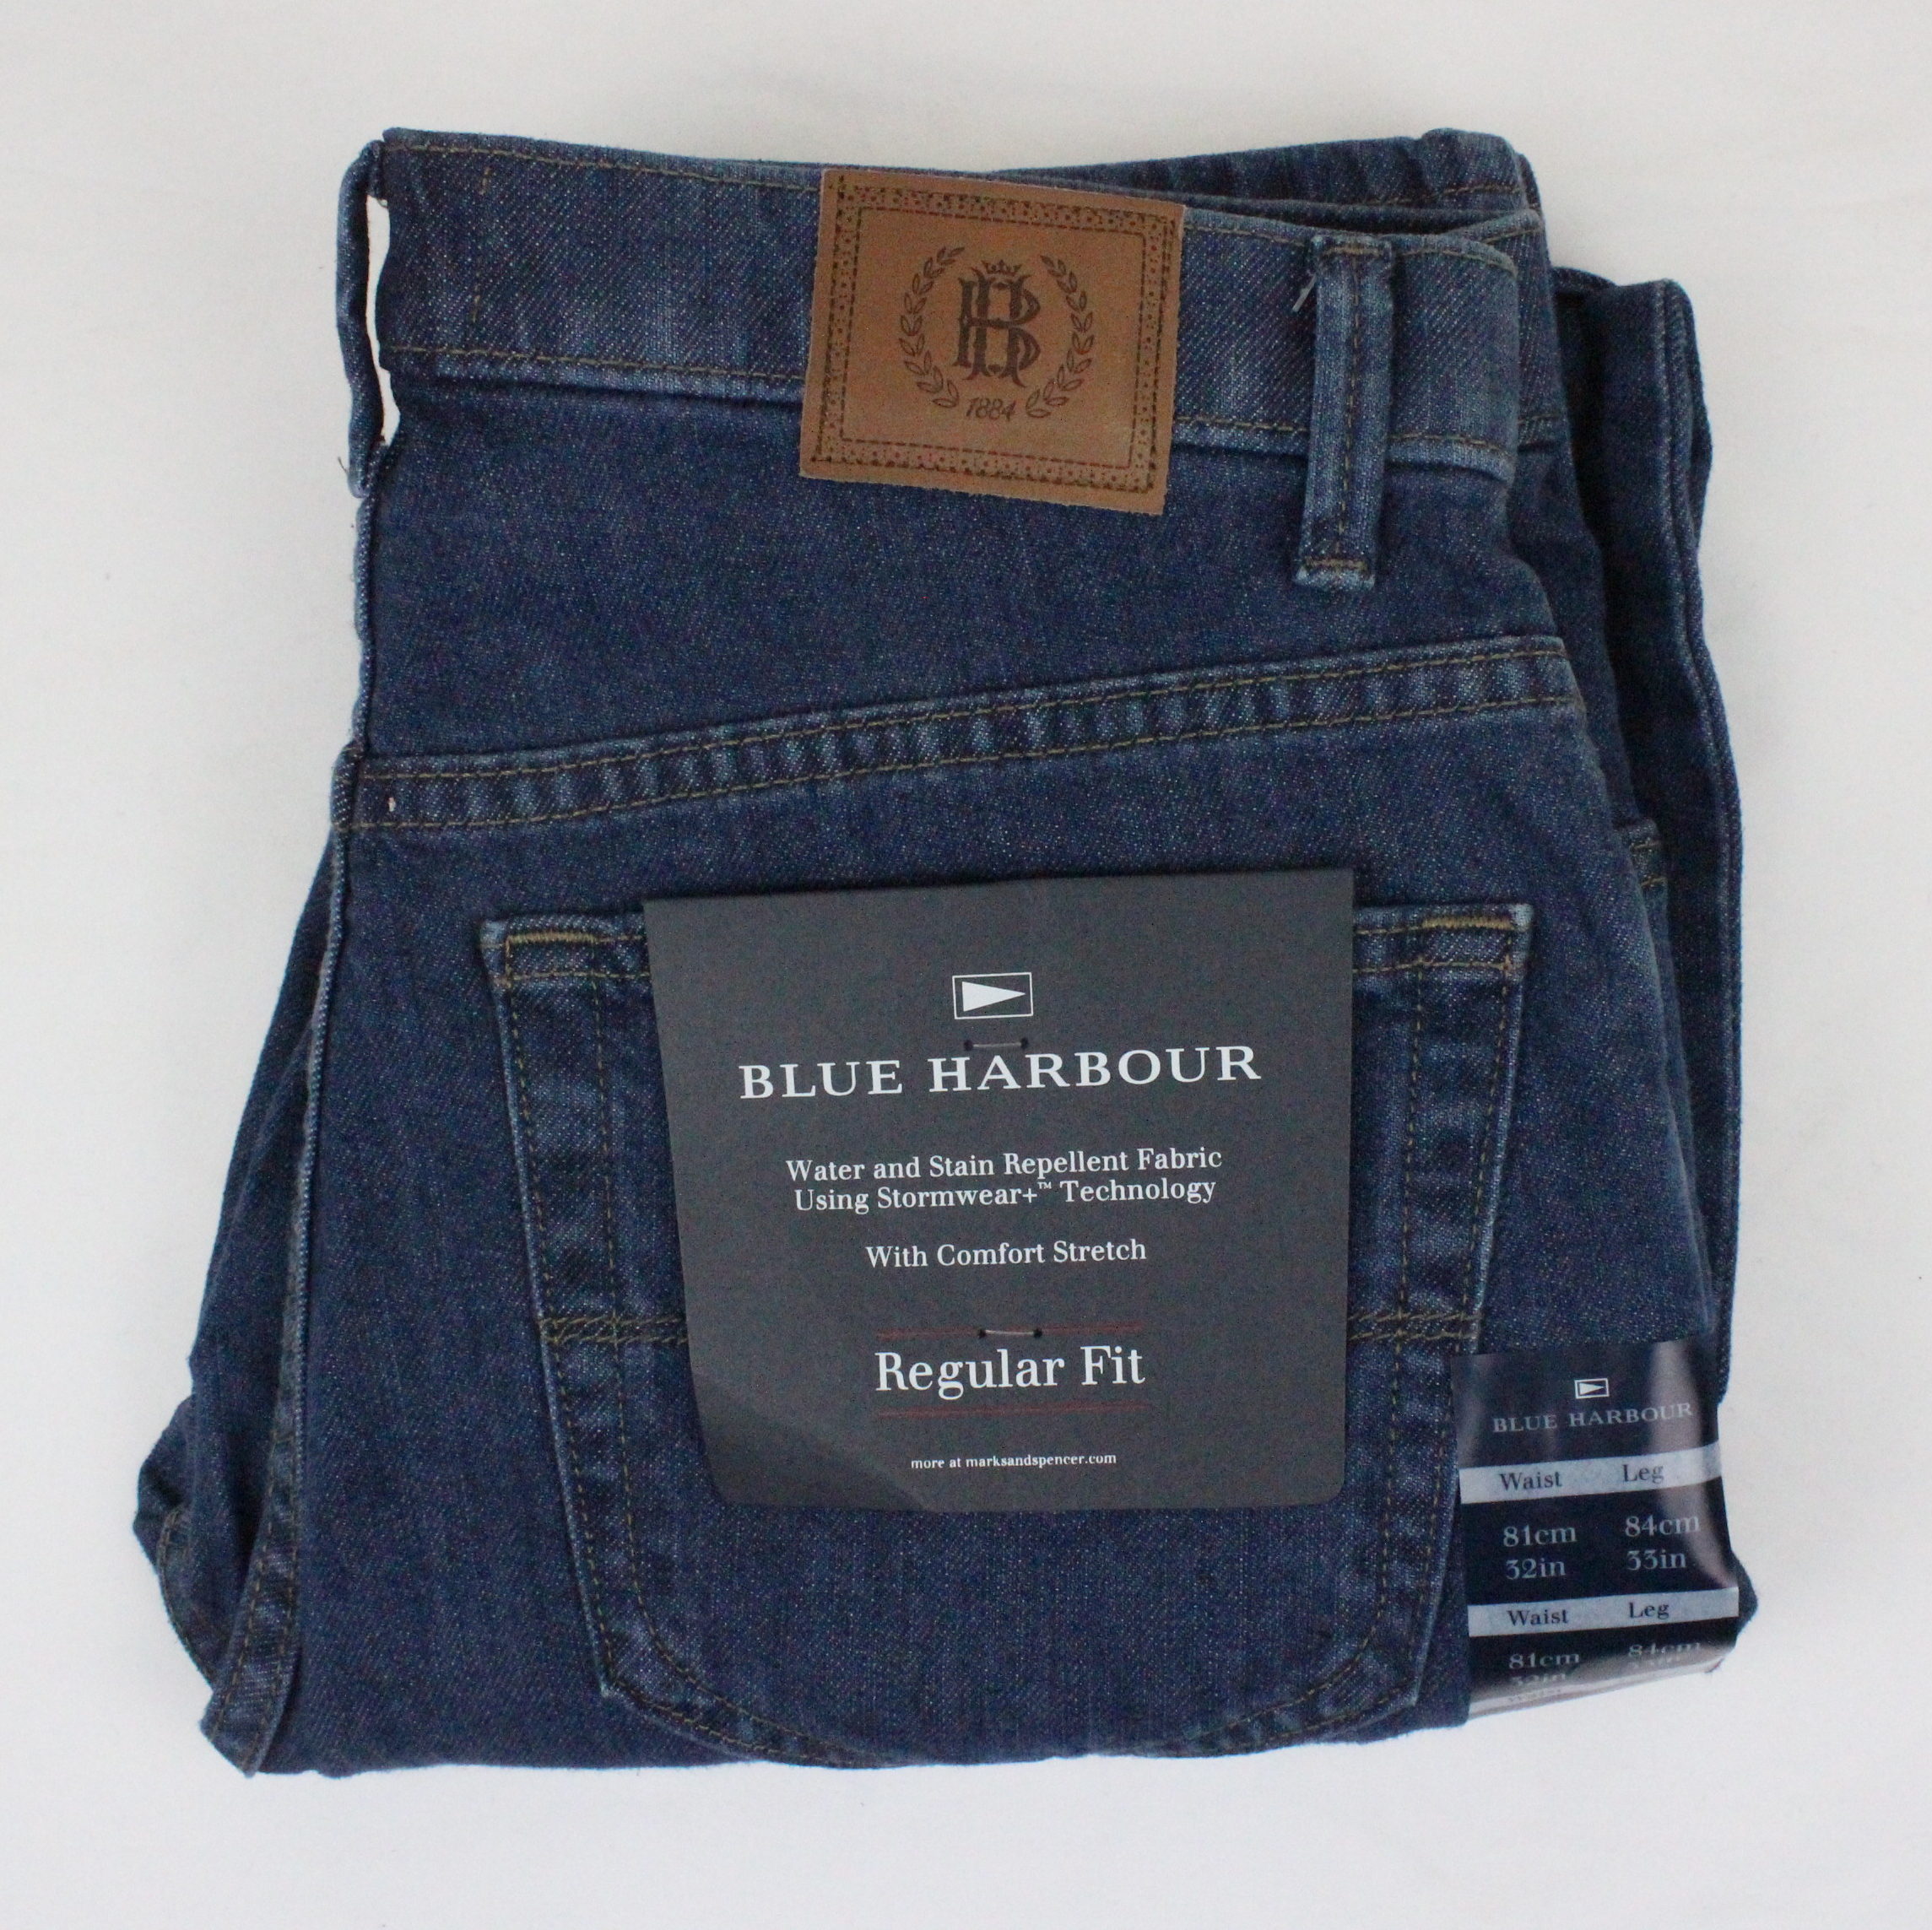 marks and spencer mens jeans